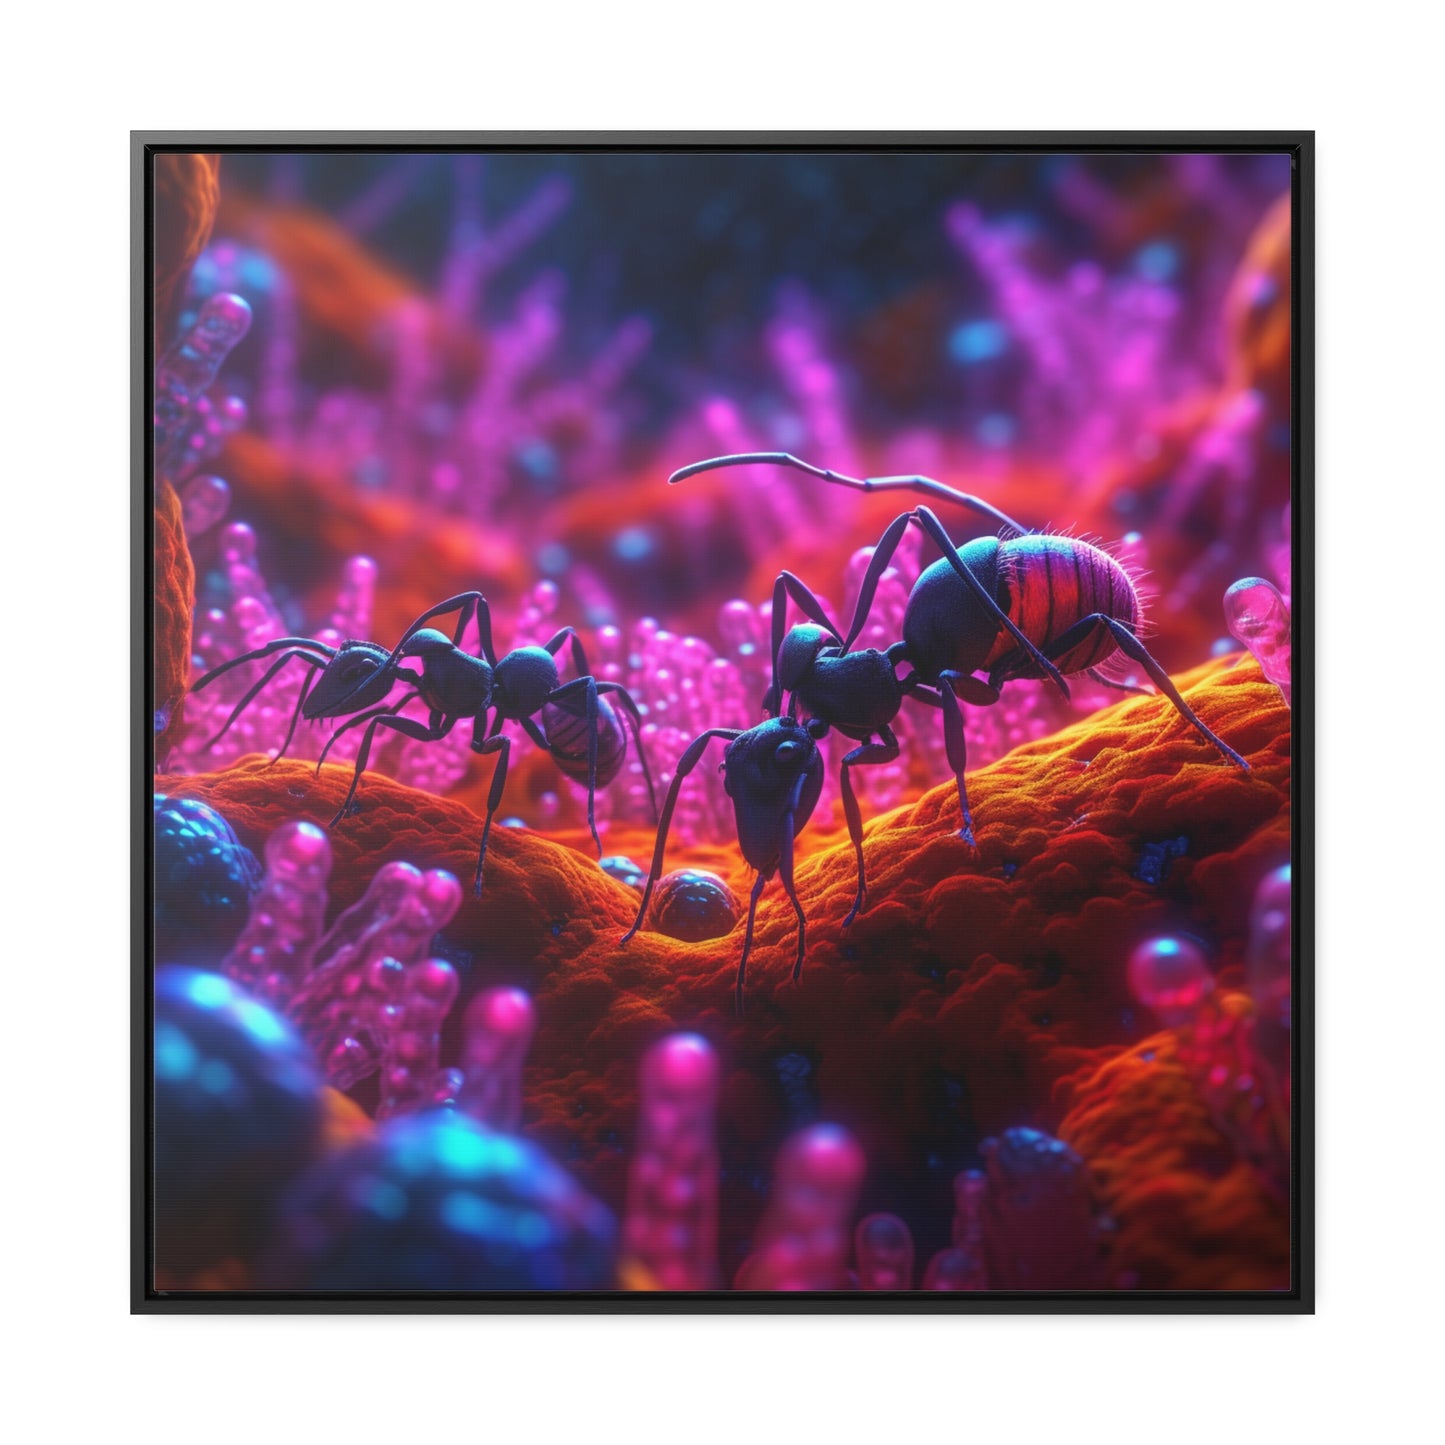 Gallery Canvas Wraps, Square Frame Ants Home 4